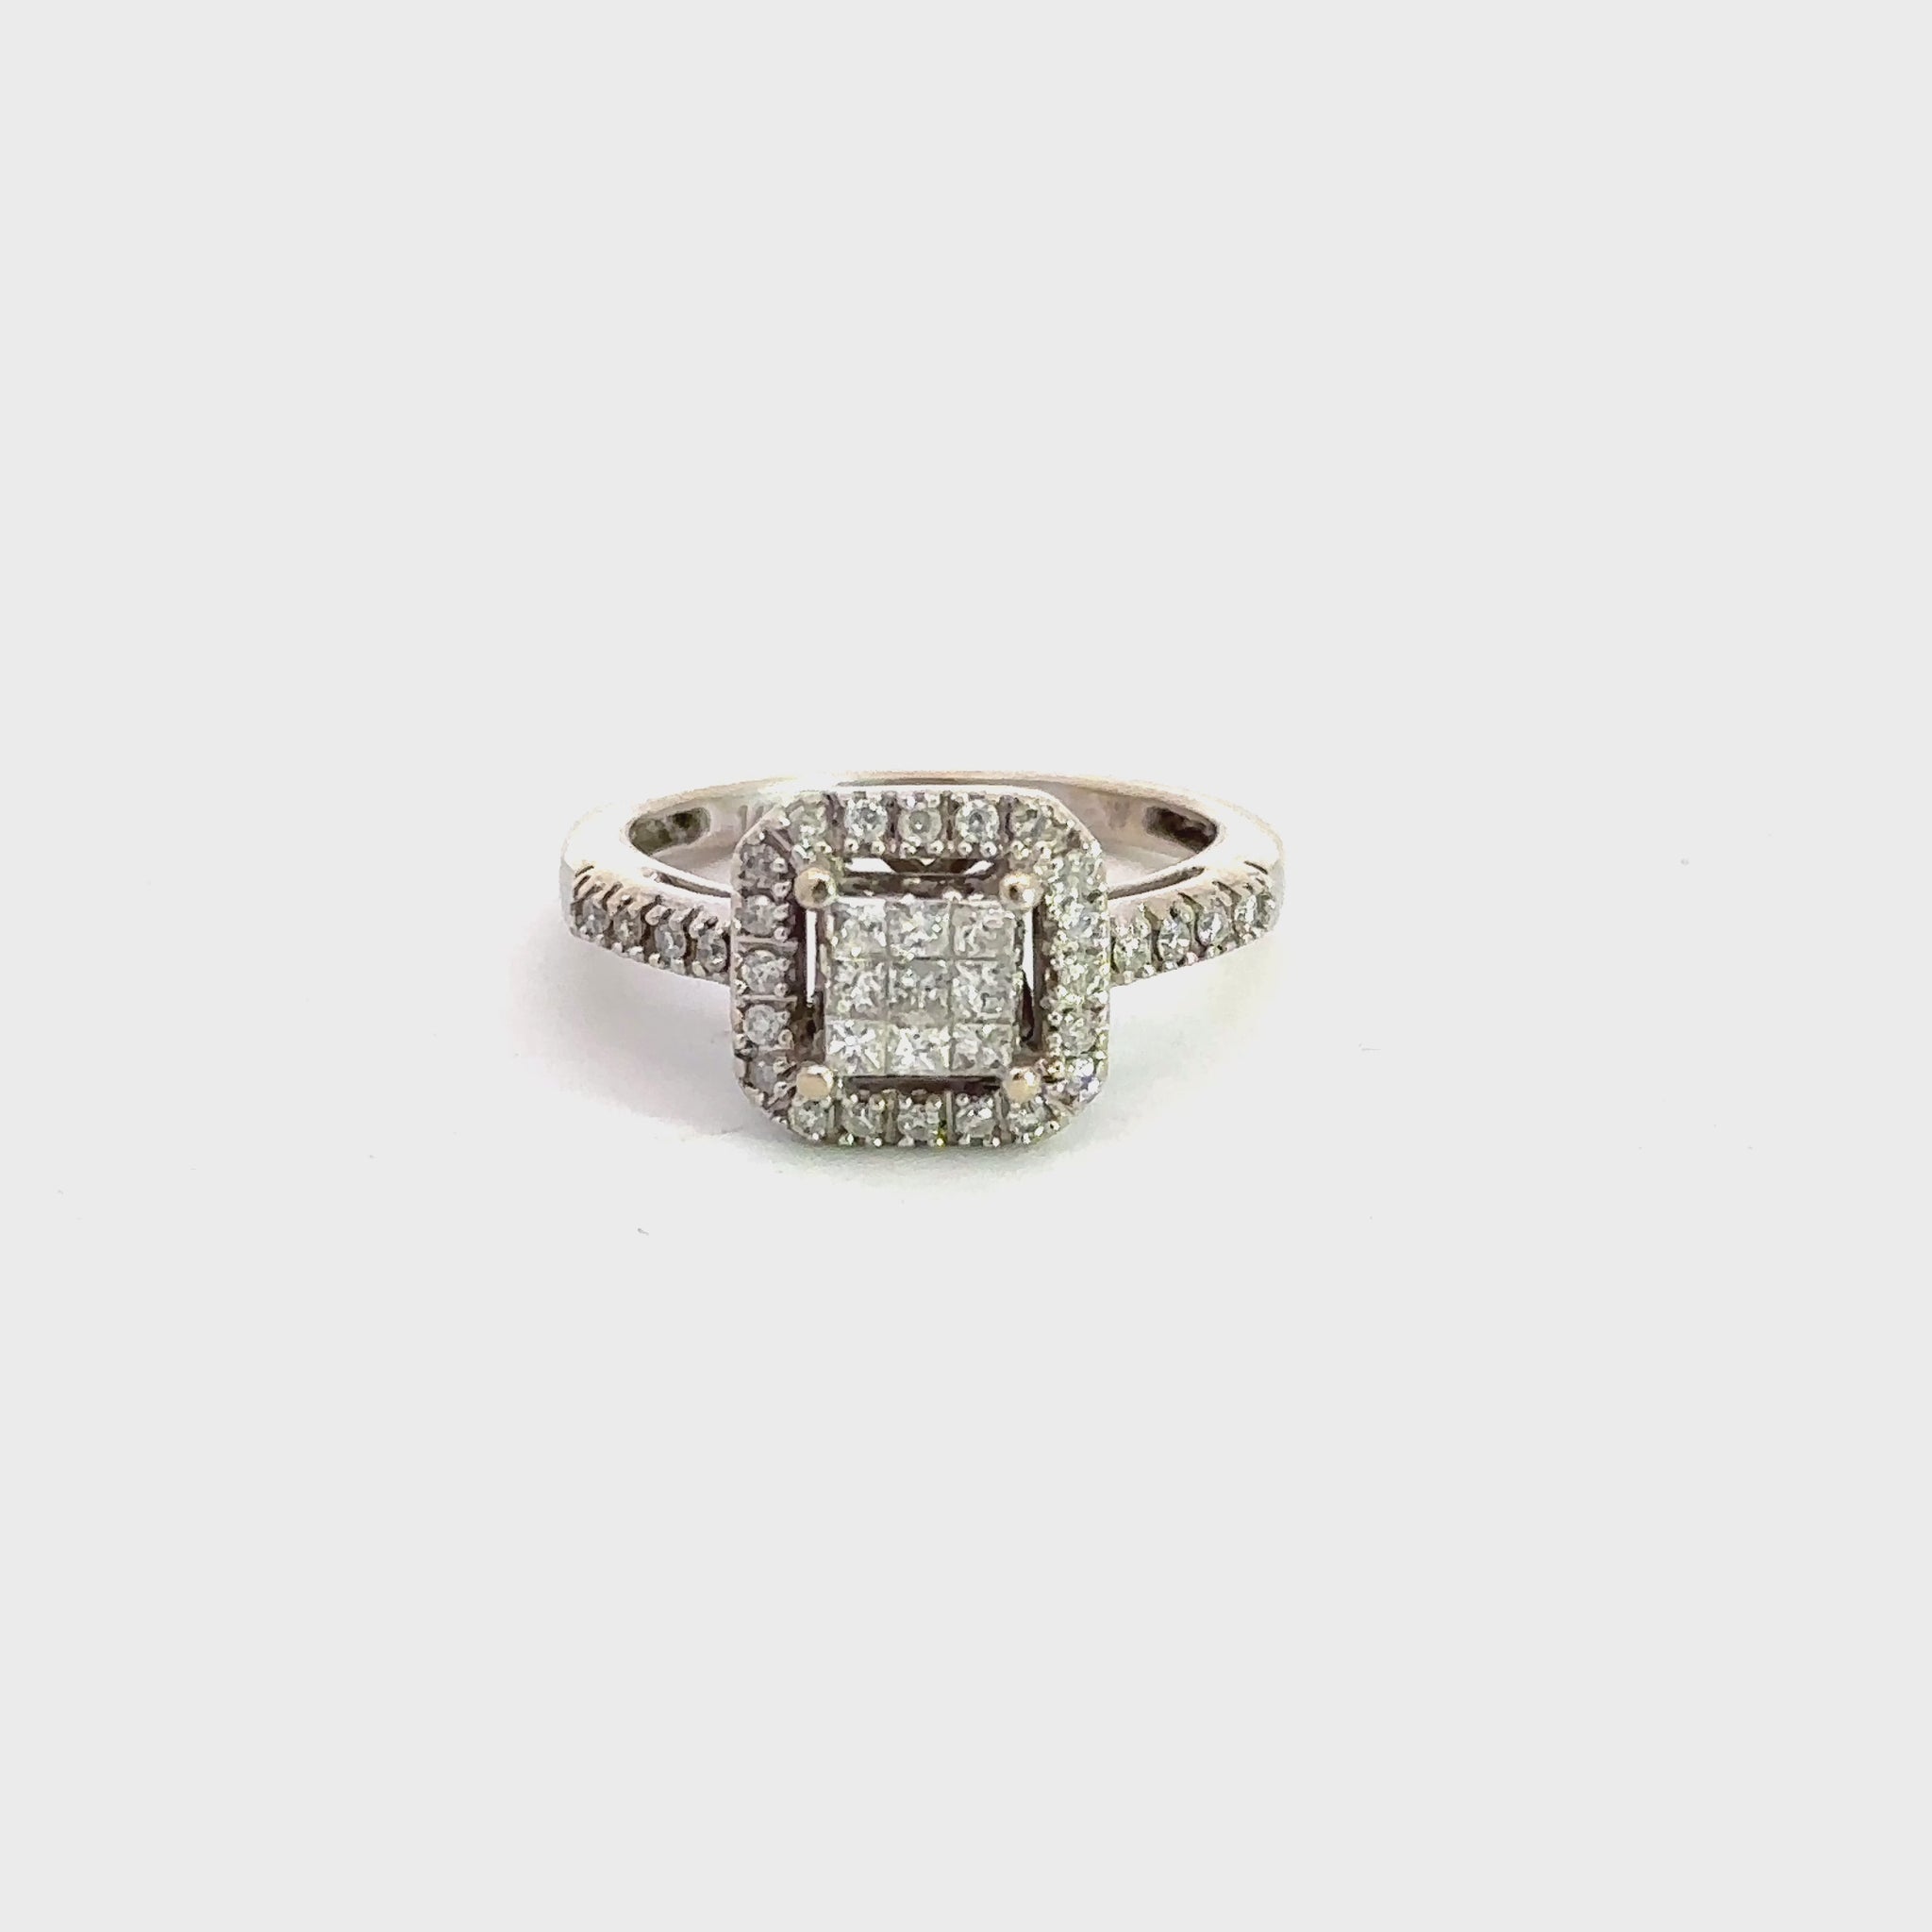 360 Video of white gold diamond engagement ring with round + princess cut diamonds in square setting